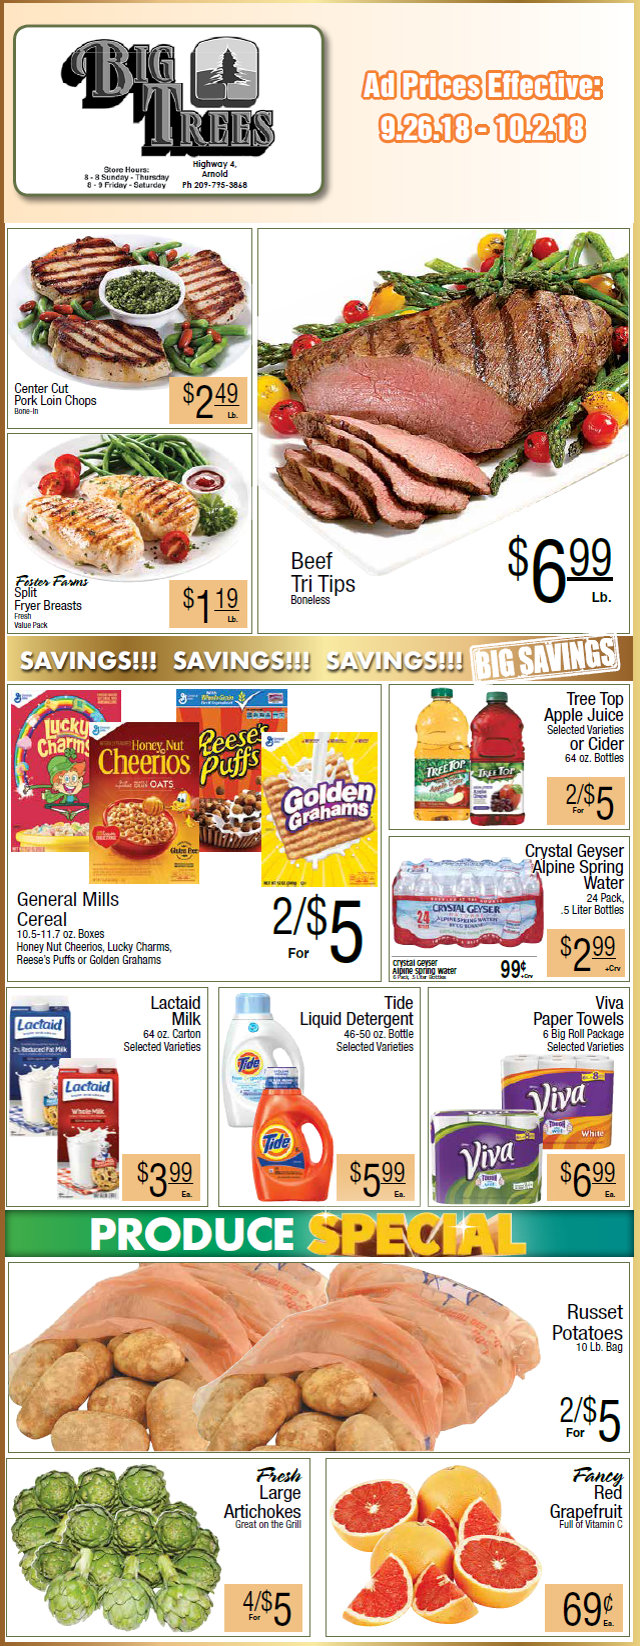 Big Trees Market Weekly Ad & Grocery Specials Through October 2nd